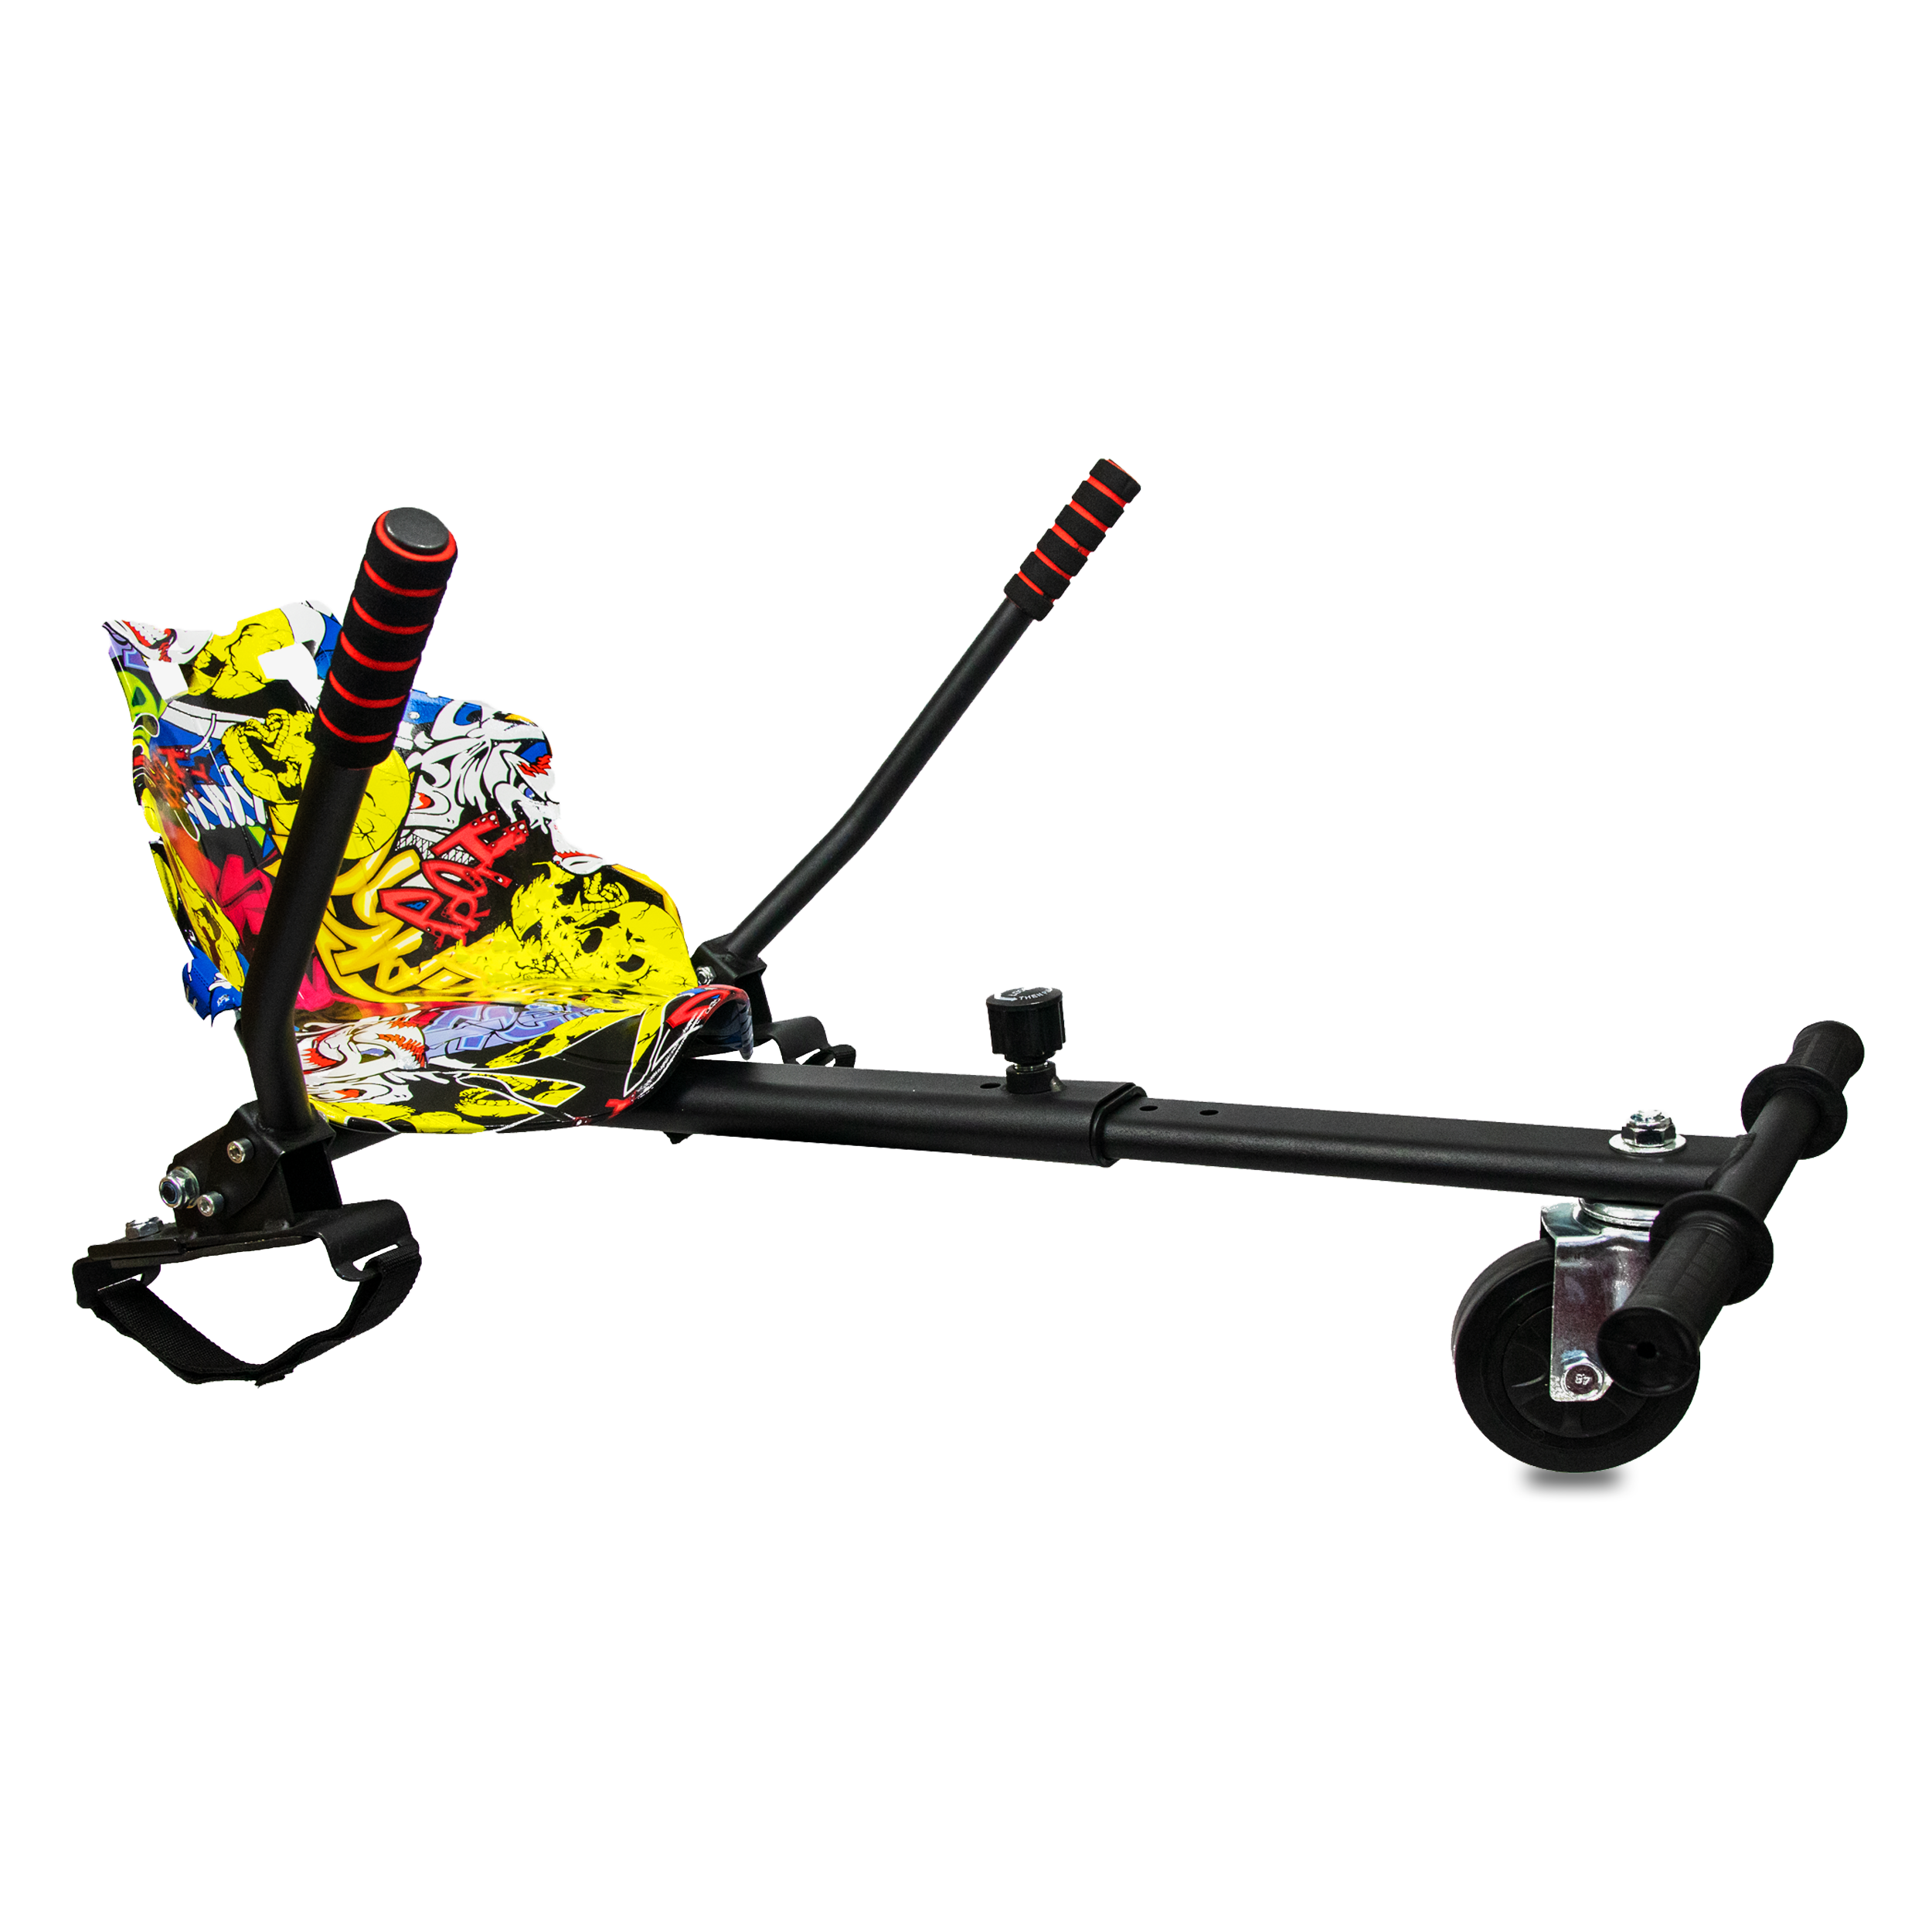 Sleek black hoverkart with colorful graffiti Yellow sports seat and red handle grips, isolated on white background.